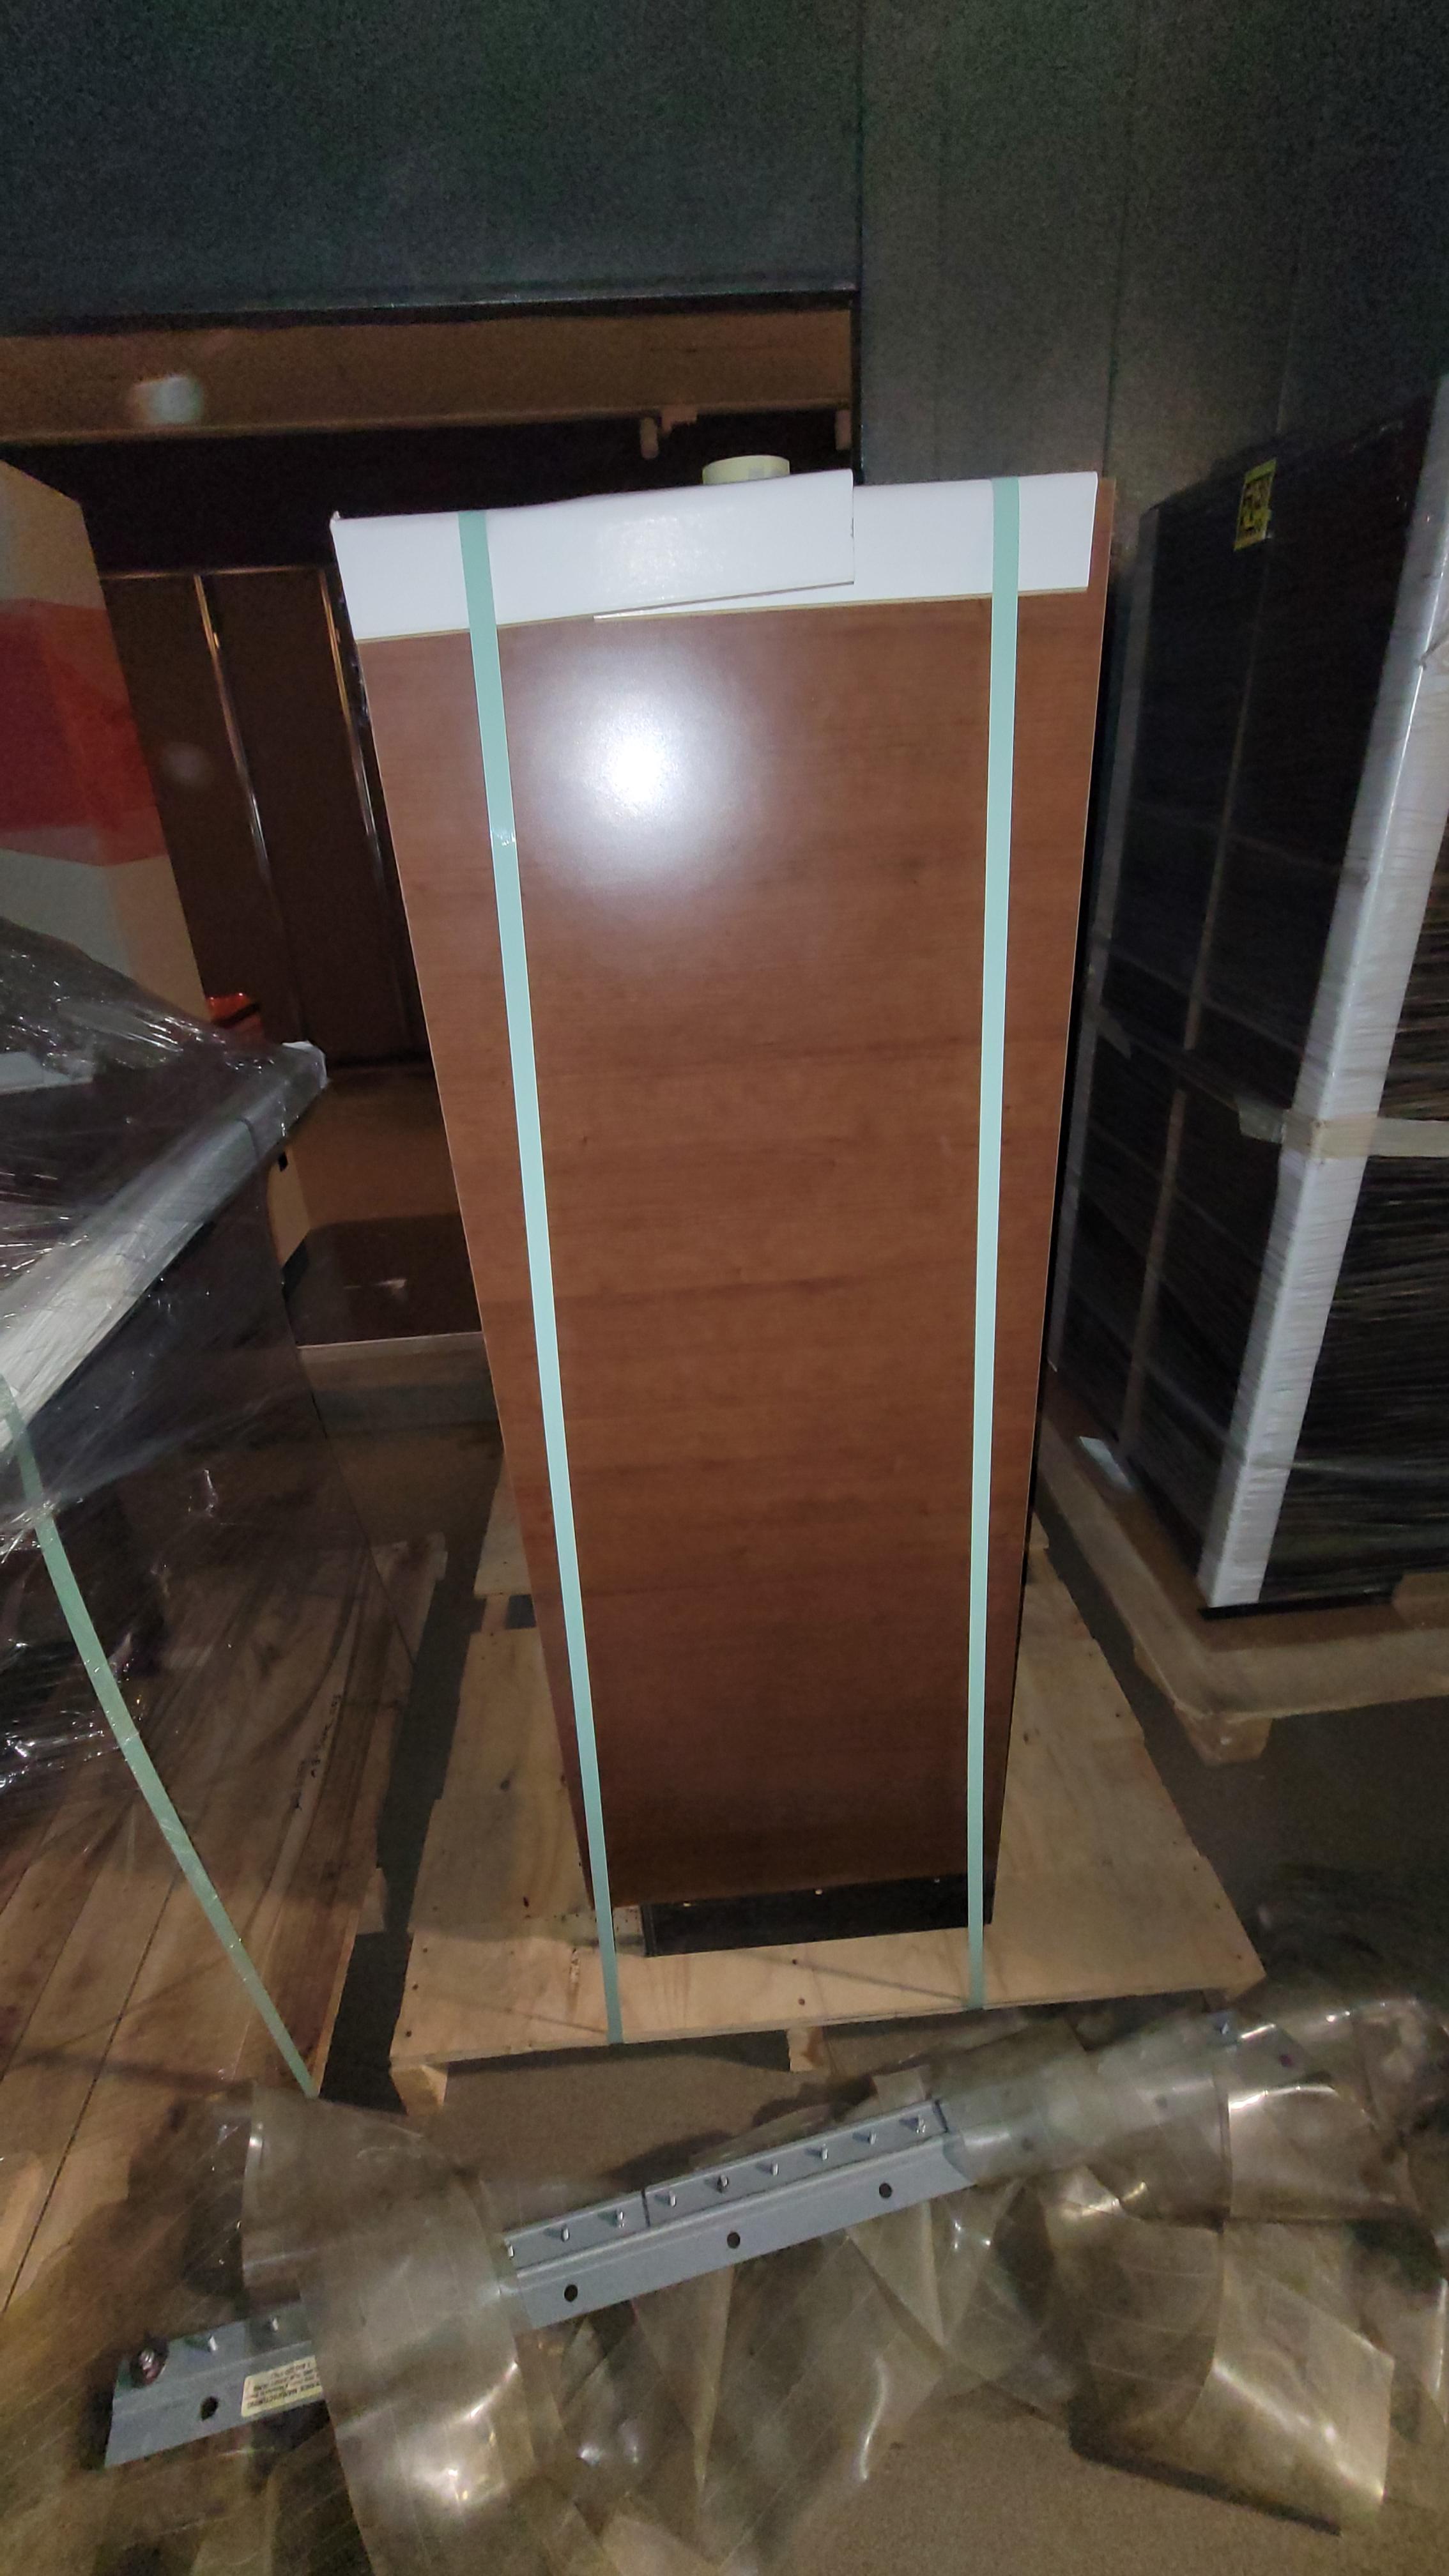 SLIDING GLASS DOOR CASE BROWN WOOD 48 X 18 X 54 3 SHELVES AND KEY INCLUDED